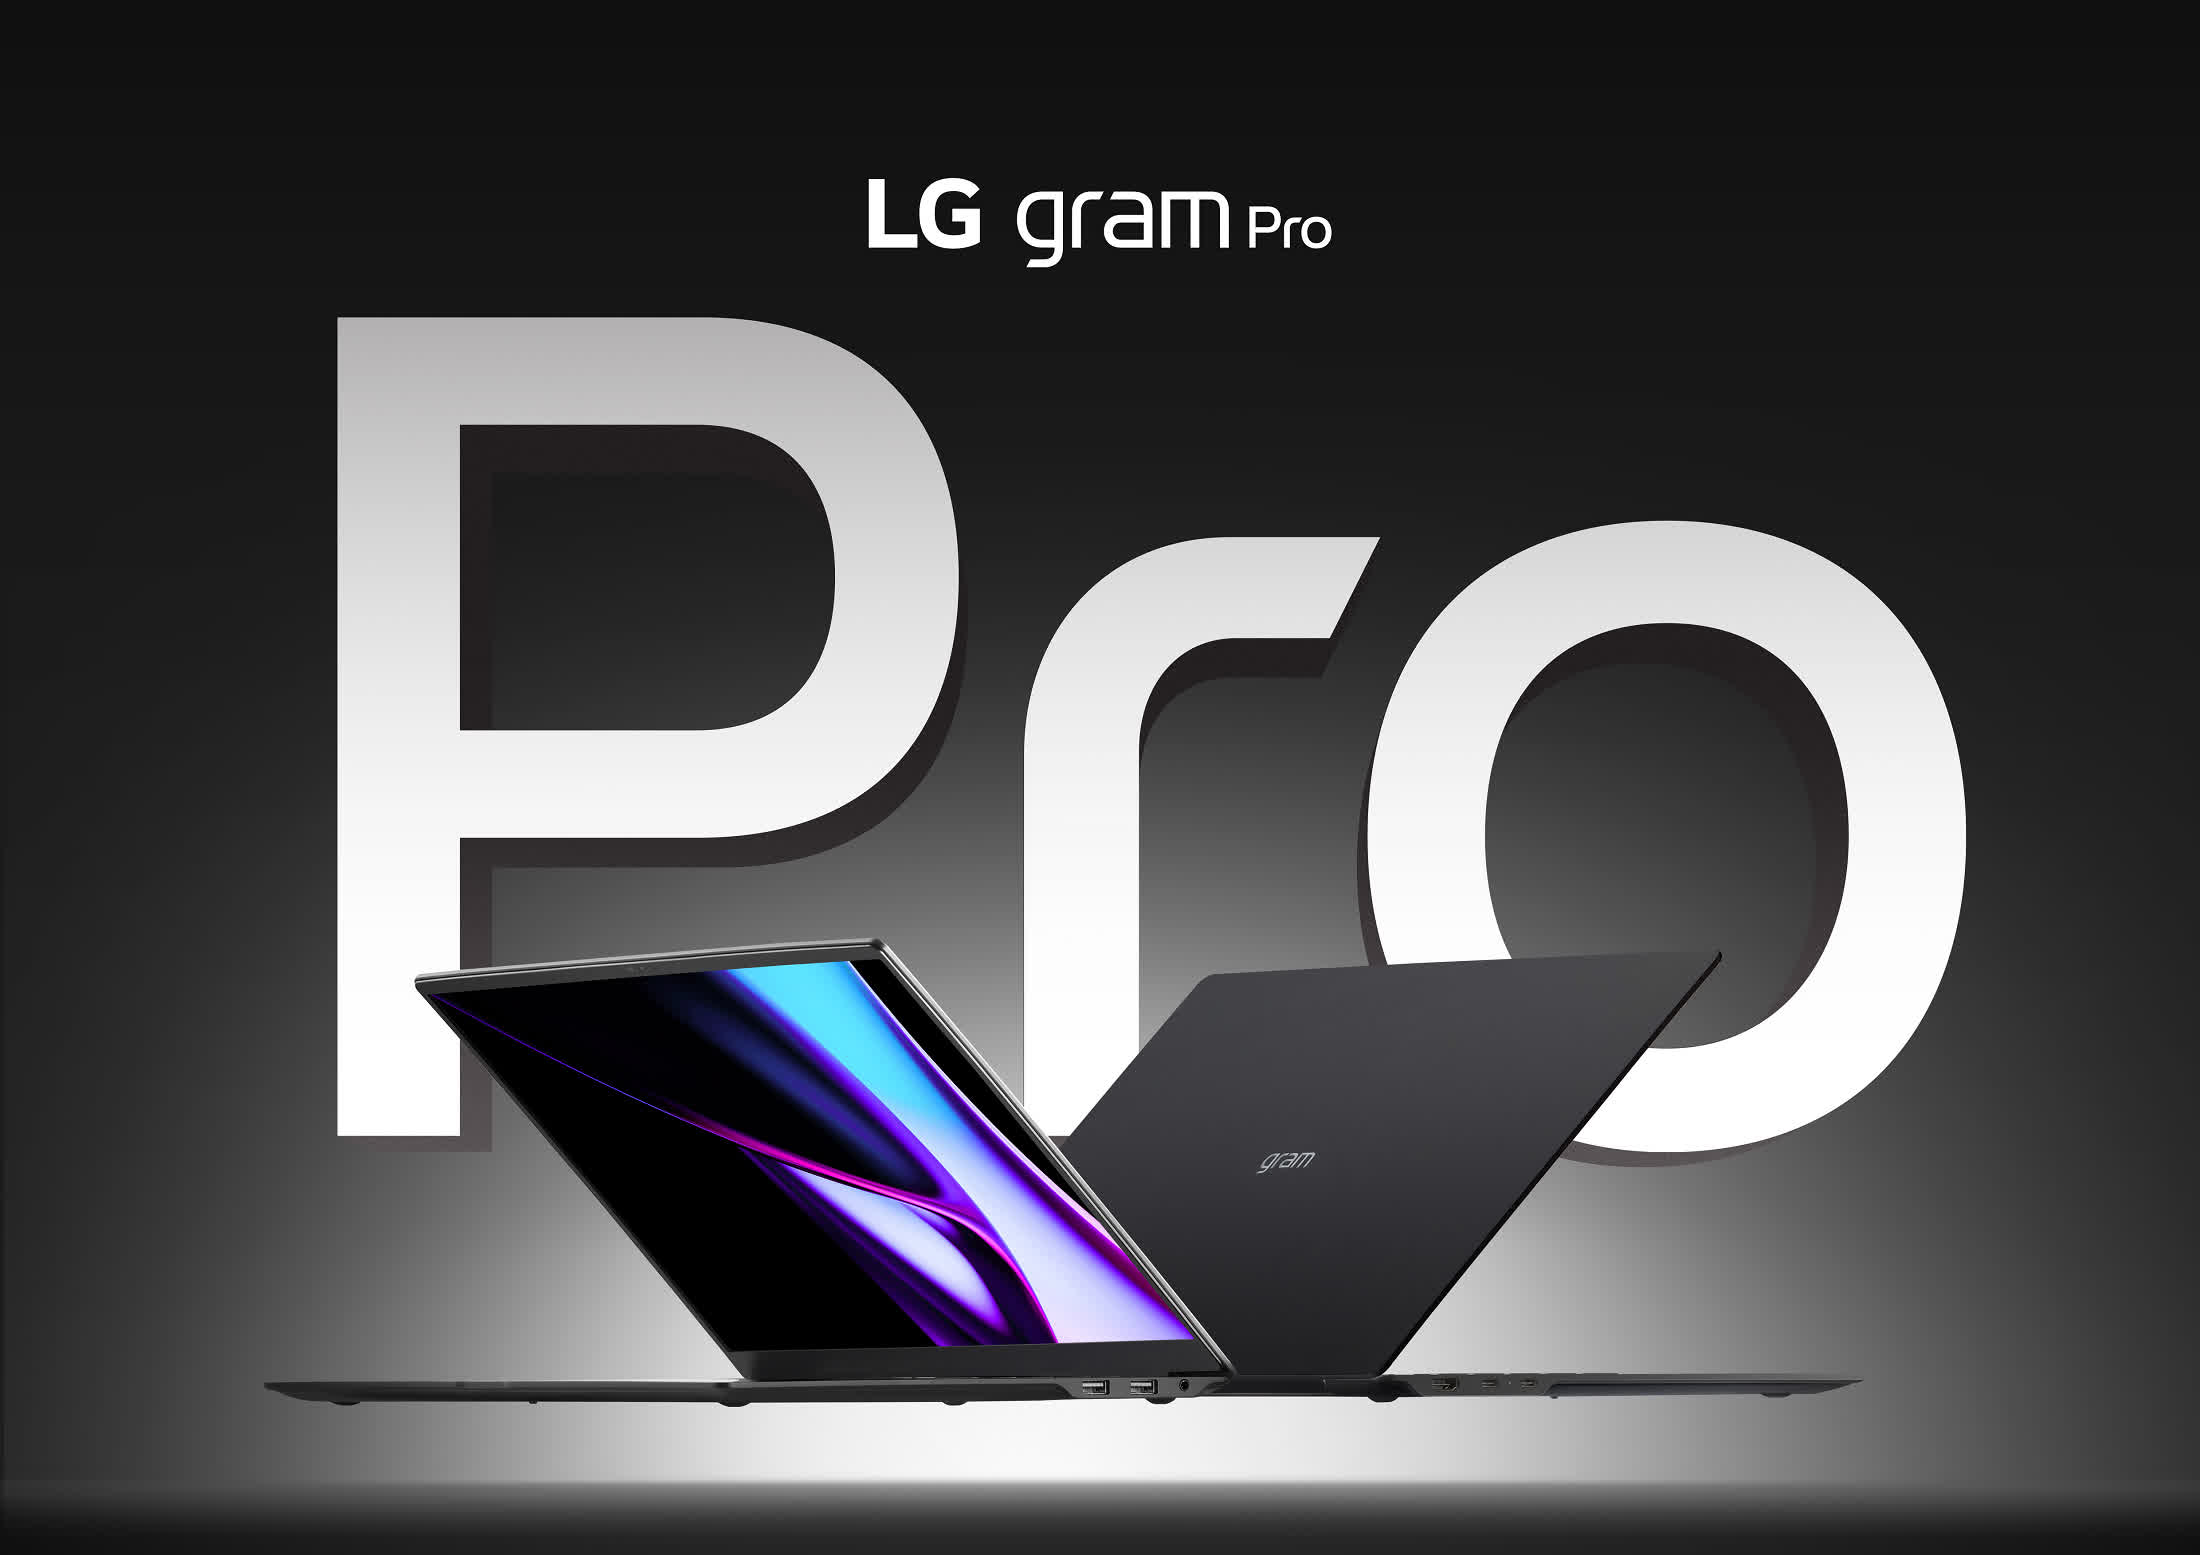 New ultra-lightweight LG Gram Pro laptops include onboard AI processing